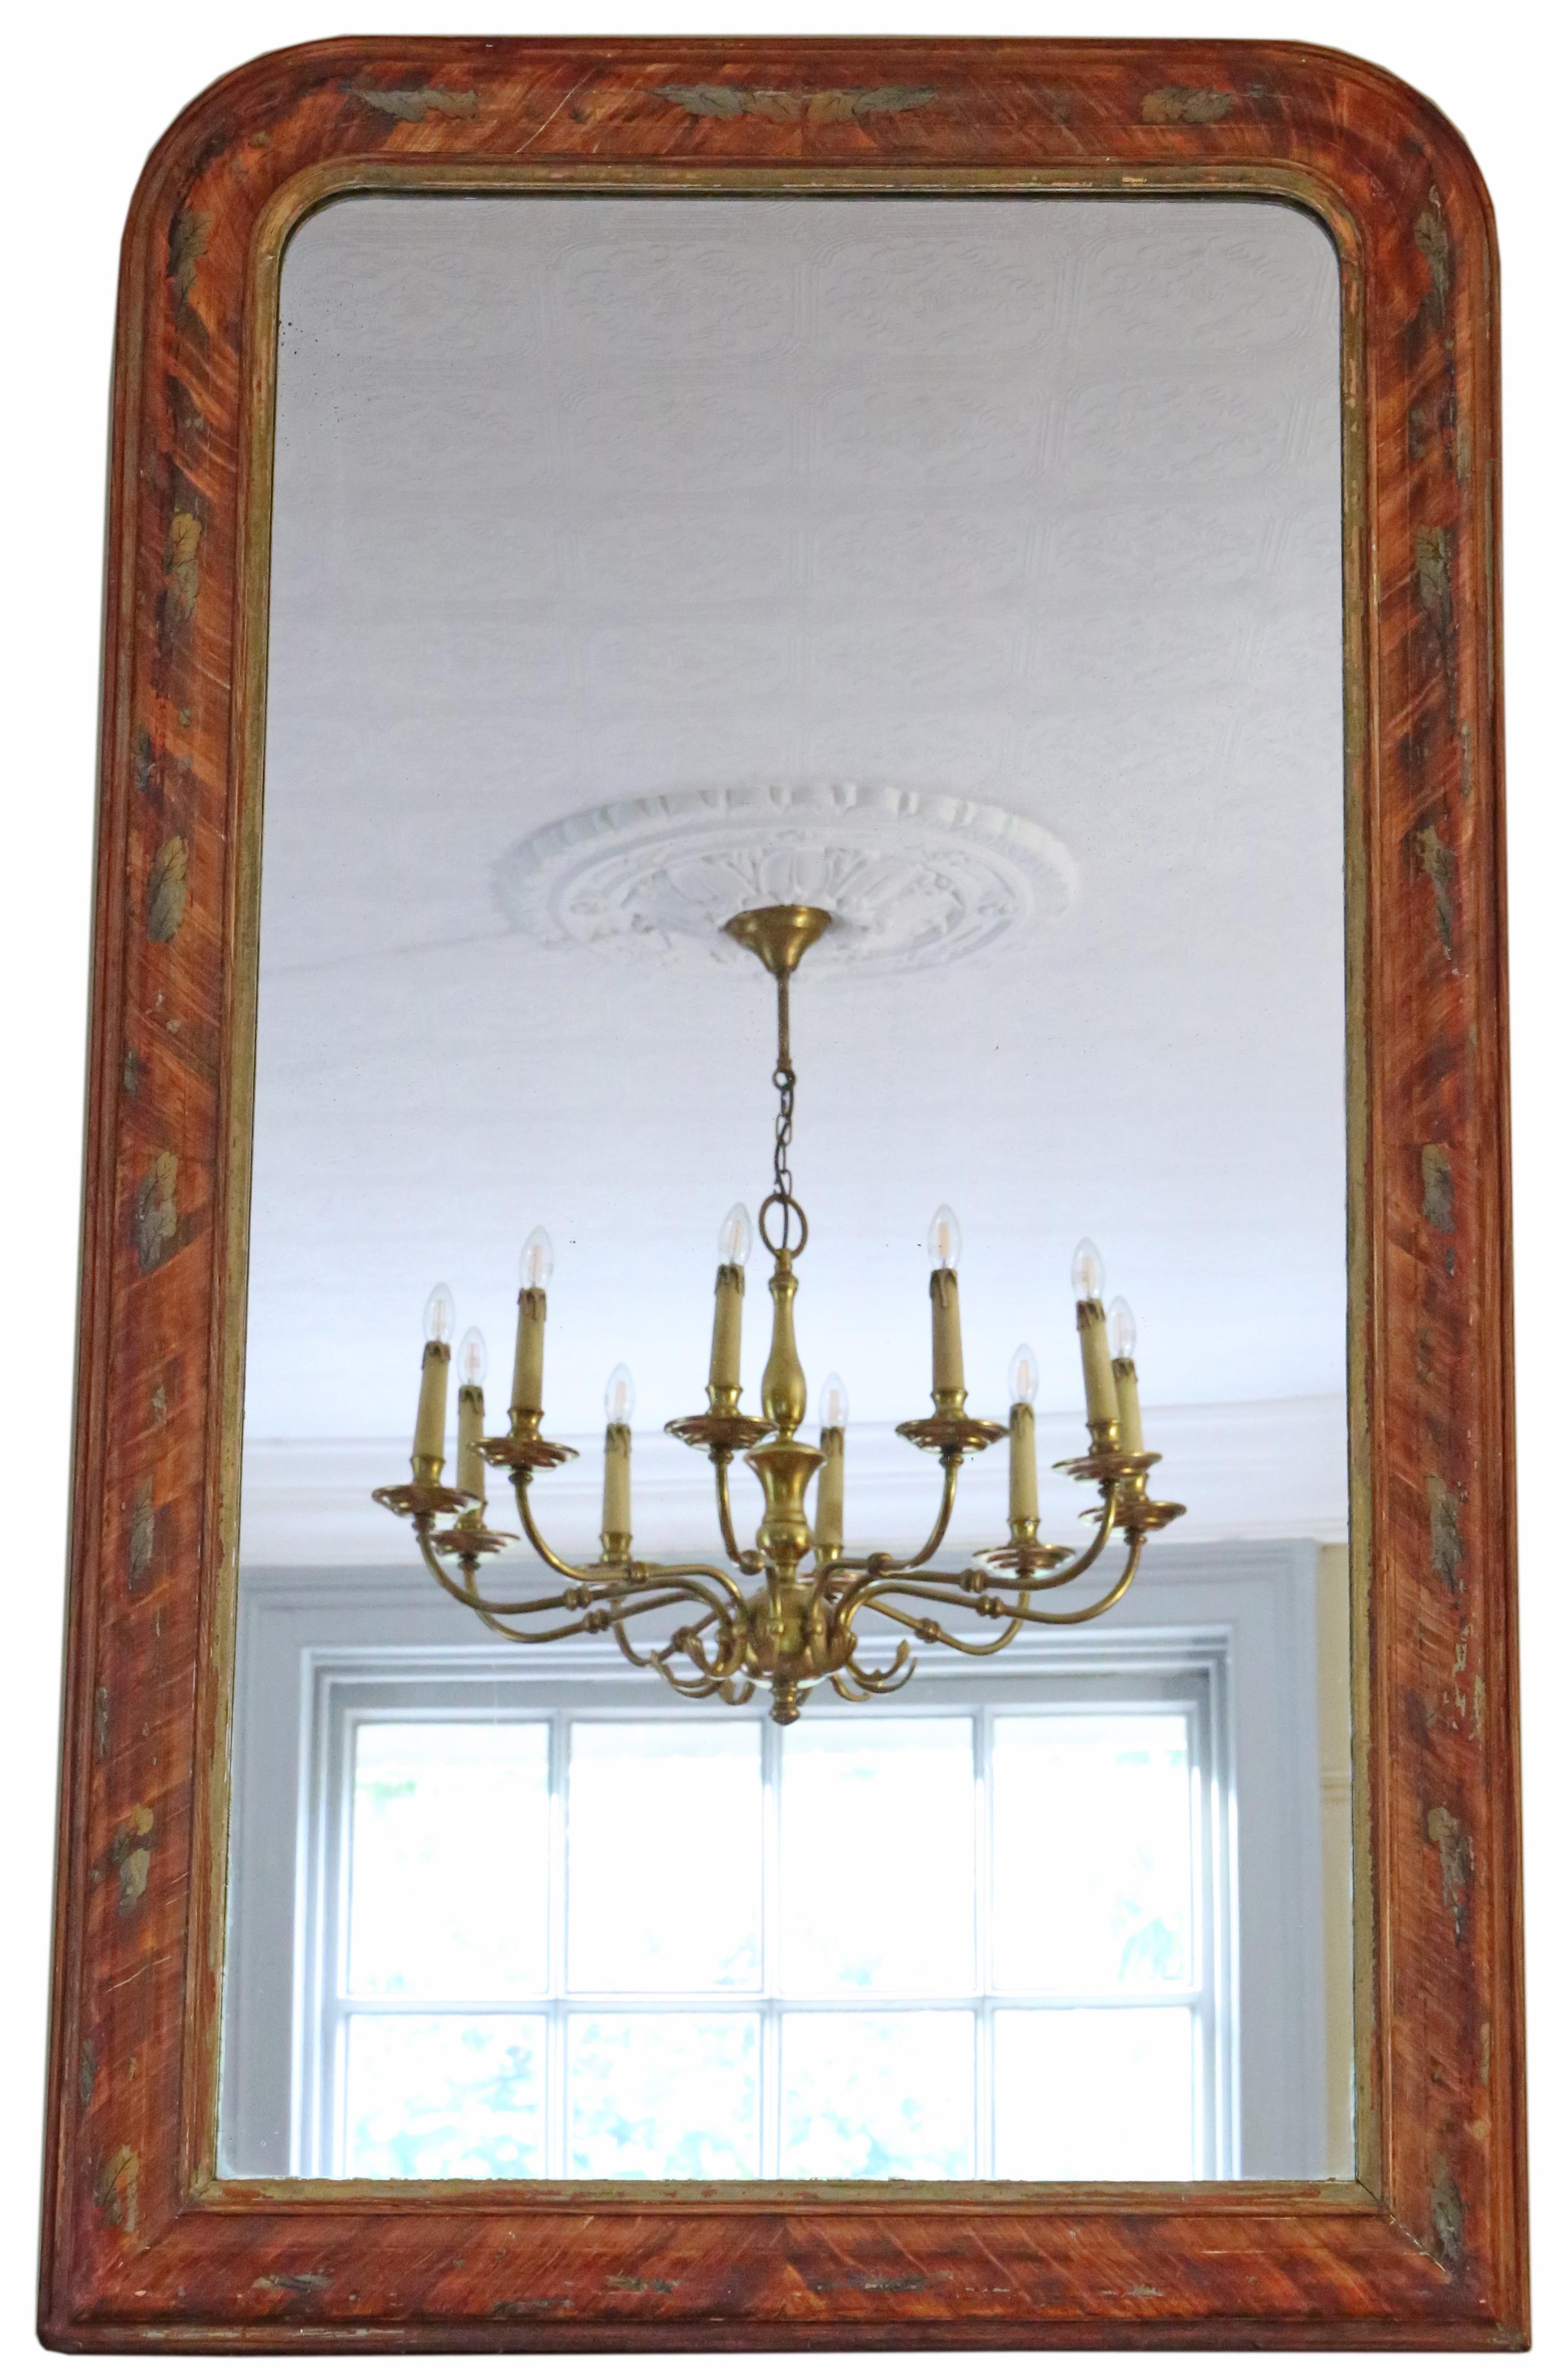 Antique large quality decorated wall or overmantle mirror, 19th century.

An impressive rare find, that would look amazing in the right location. No loose joints.

The original mirrored glass has only light oxidation and other age related